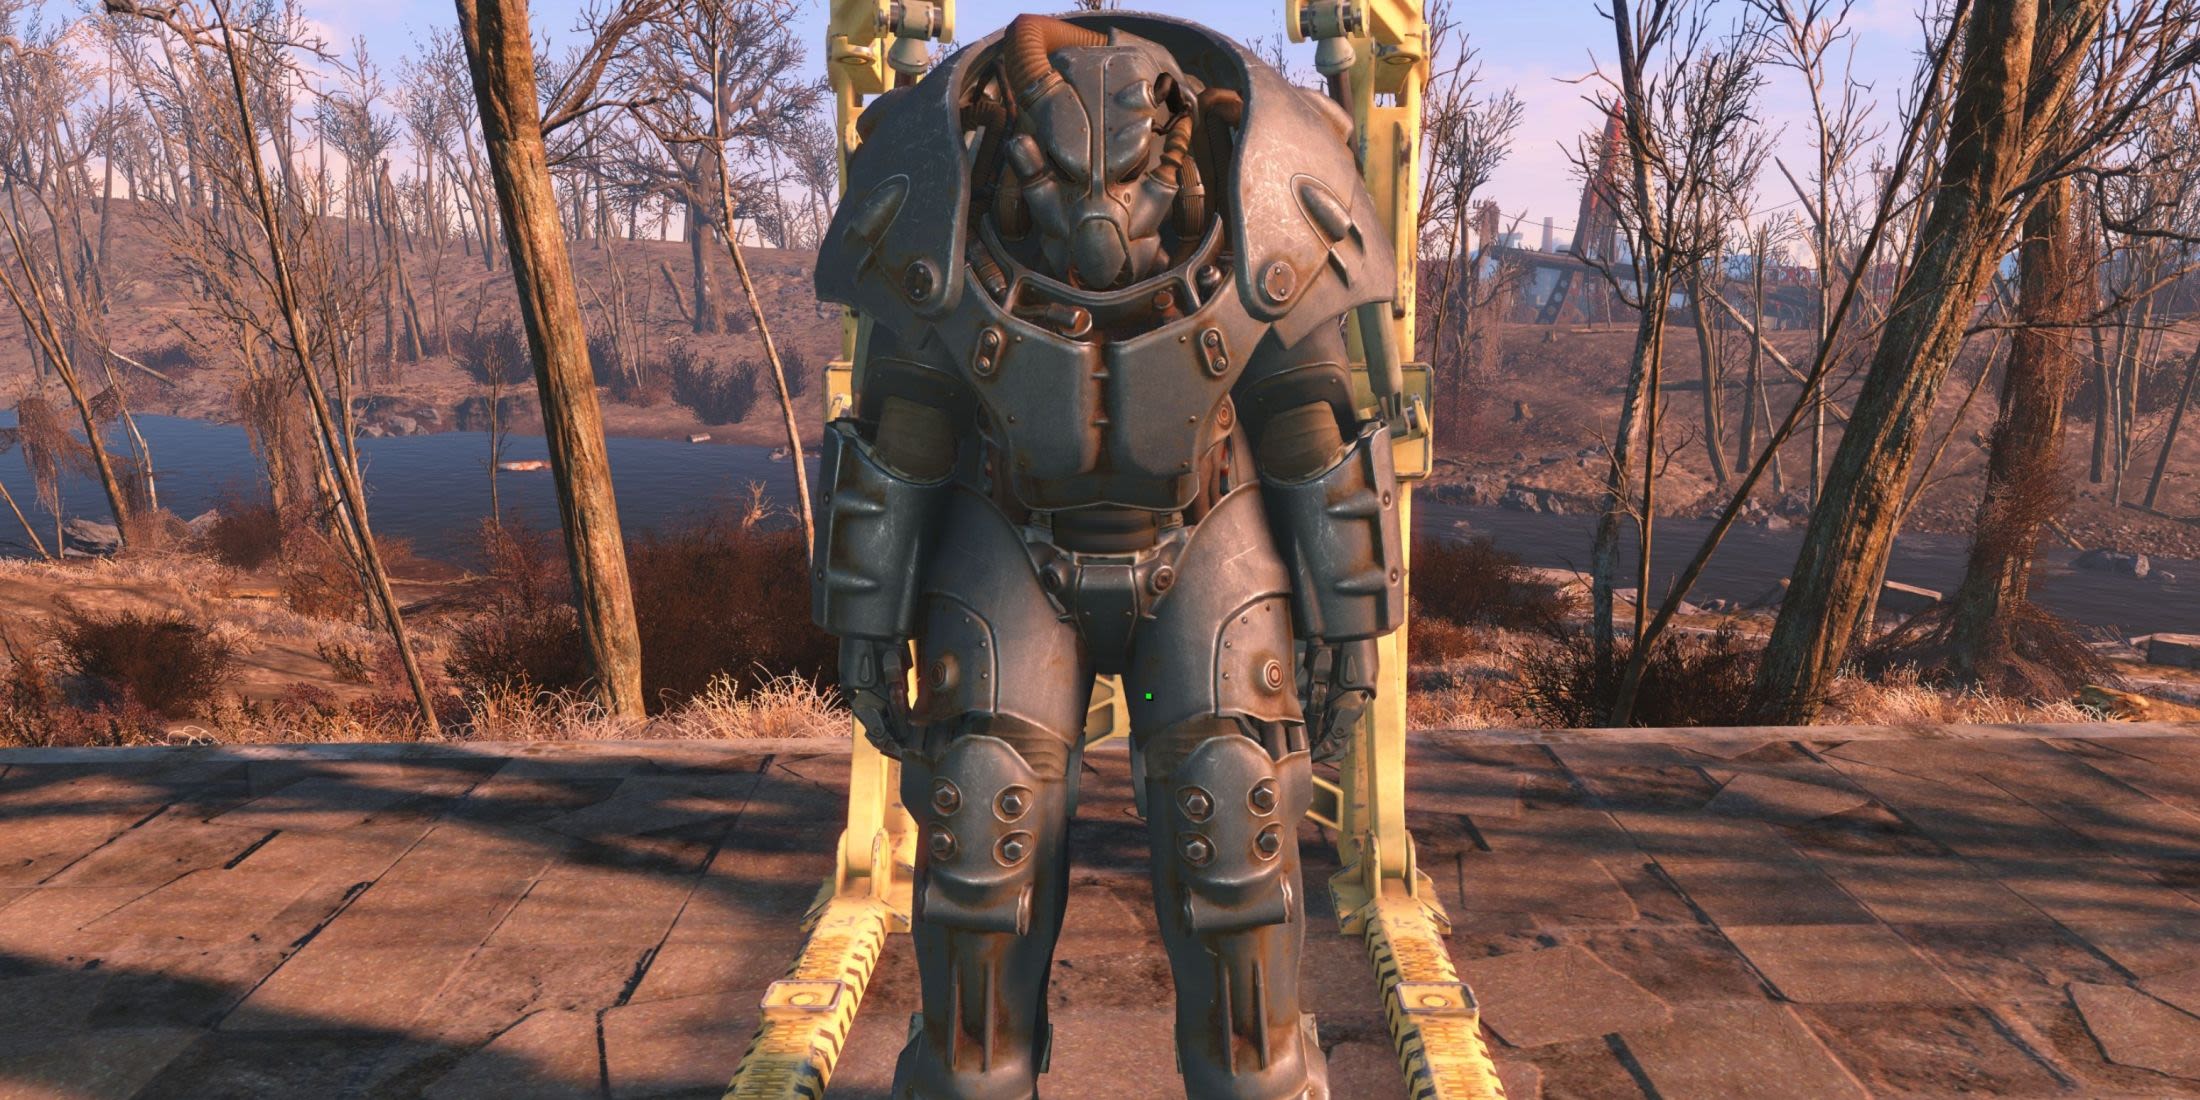 Fallout 4 Player Loses Their Power Armor on the Old Ironsides Ship